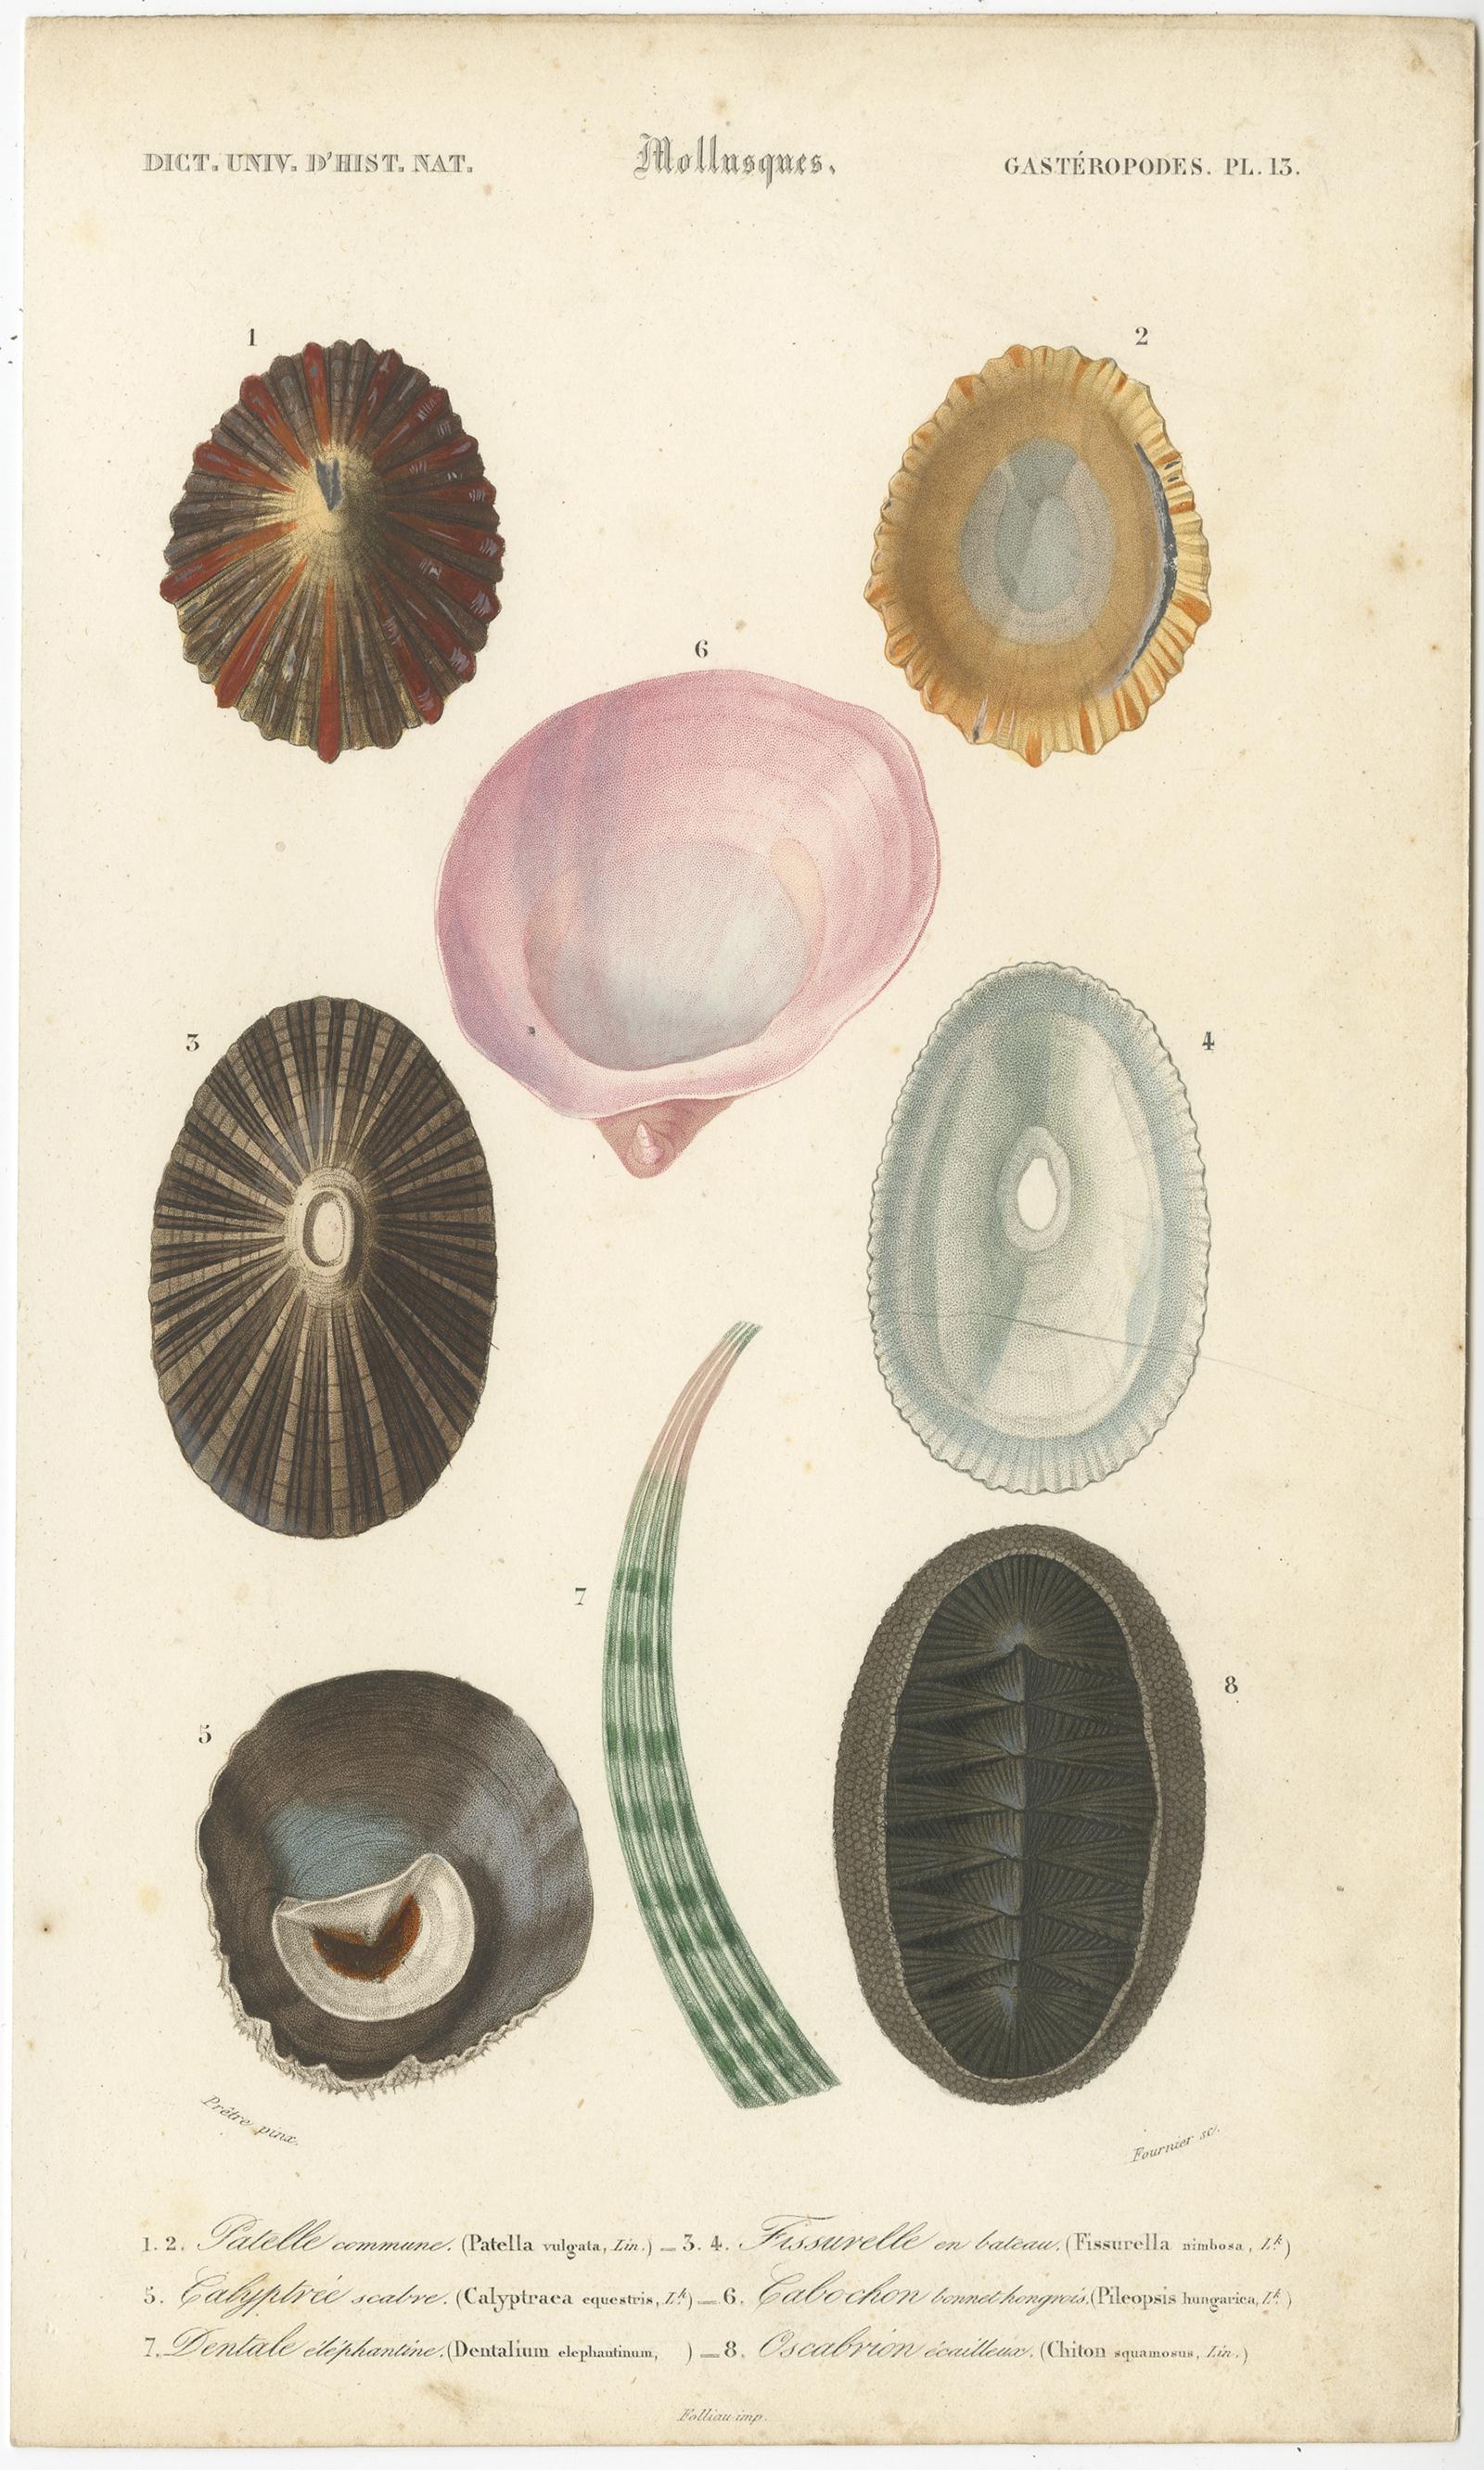 Antique print titled 'Pl. 13 Mollusques - Gastéropodes'. 

Old print of different types of molluscs. This print originates from 'Dictionnaire Universel d’Histoire Naturelle' by Charles D’Orbigny.

Artists and engravers: Published by Renard,